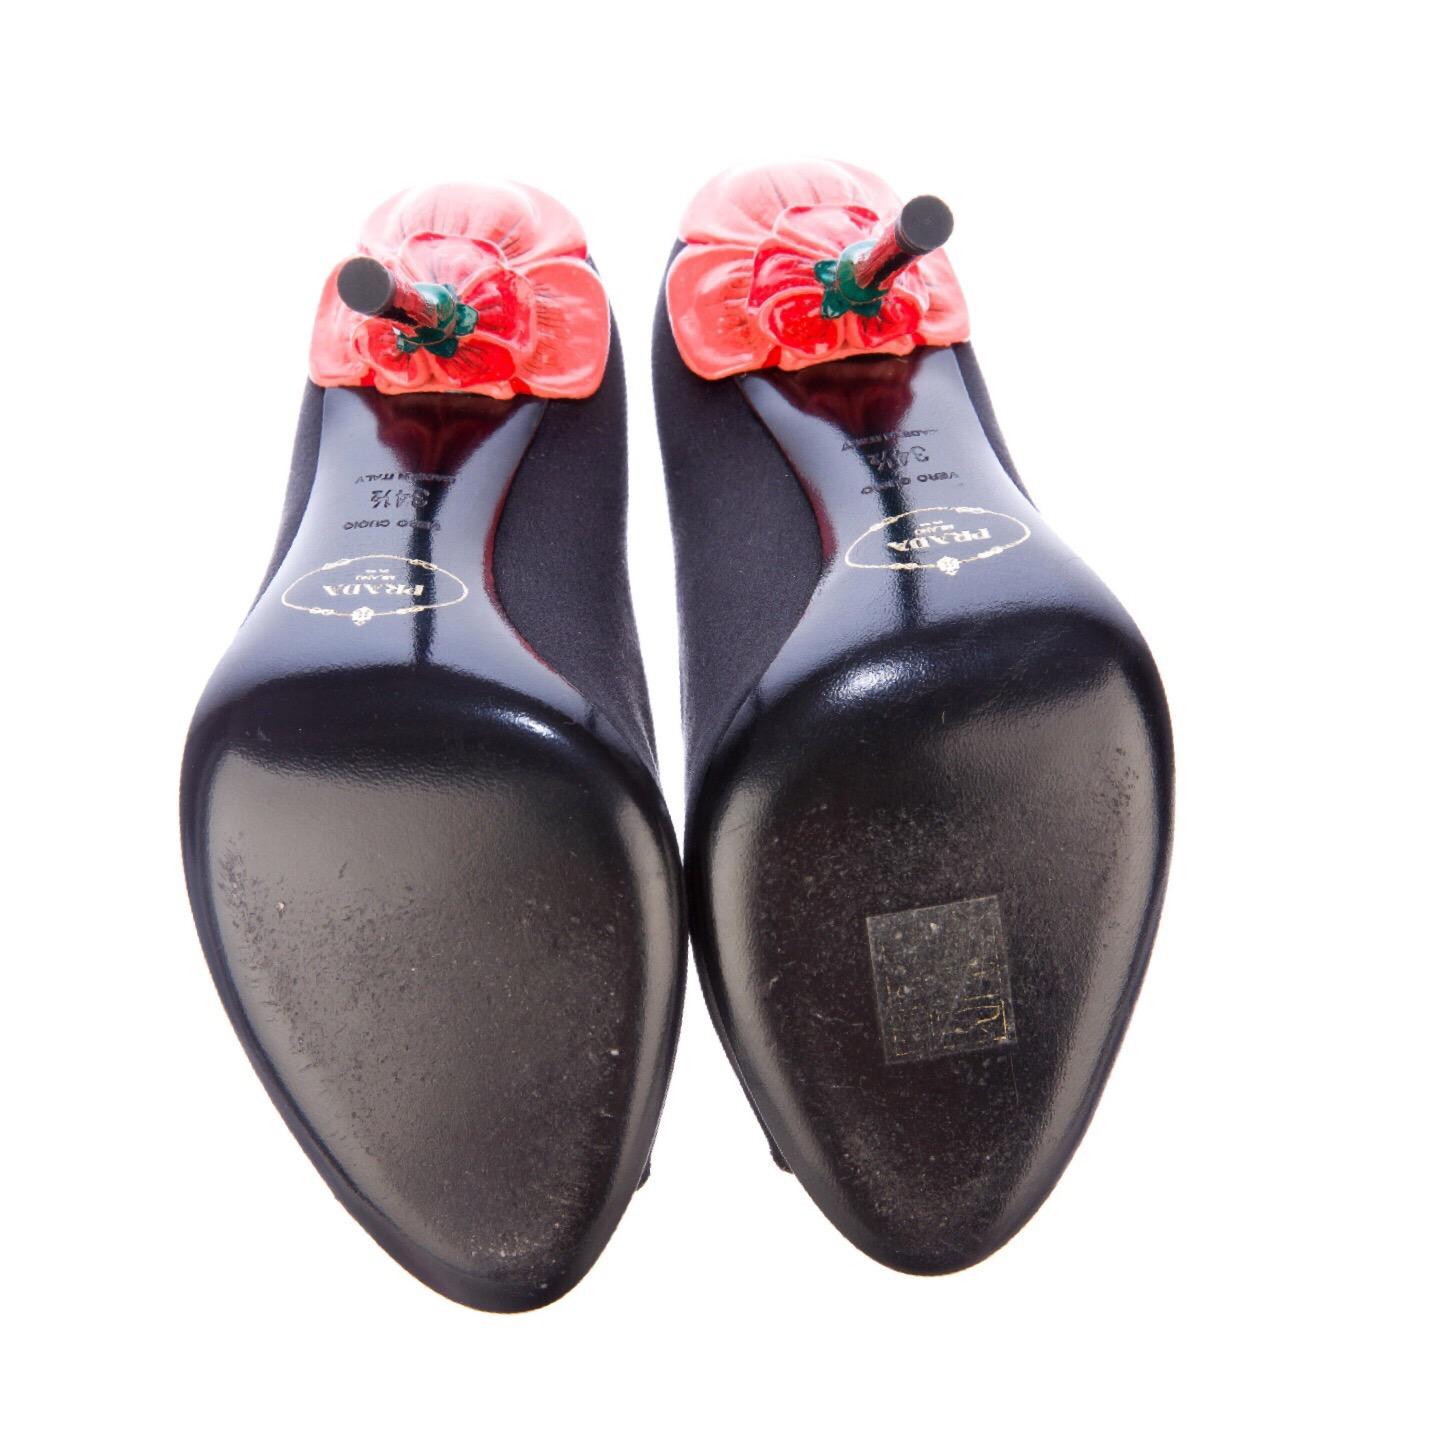 Prada Fairy Collection Black Satin Peep Toe Sculpted Flower Heel Shoes 34.5 In Excellent Condition For Sale In Boca Raton, FL